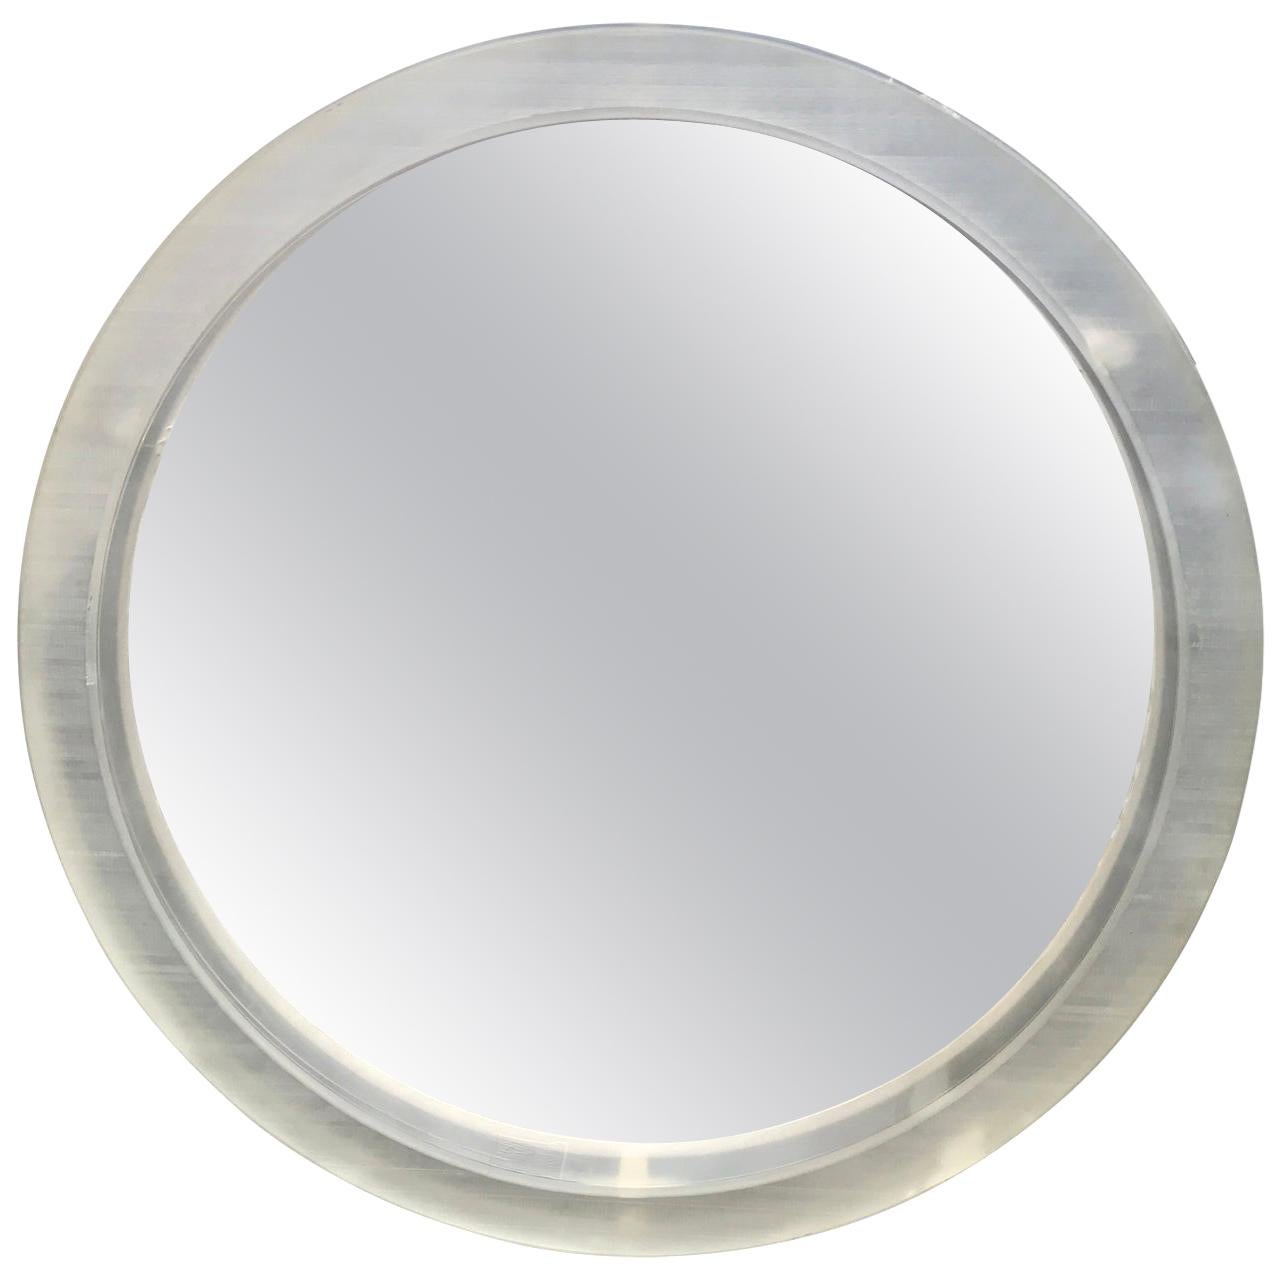 Large Round Mid-Century Modern Thick Lucite Wall Mirror